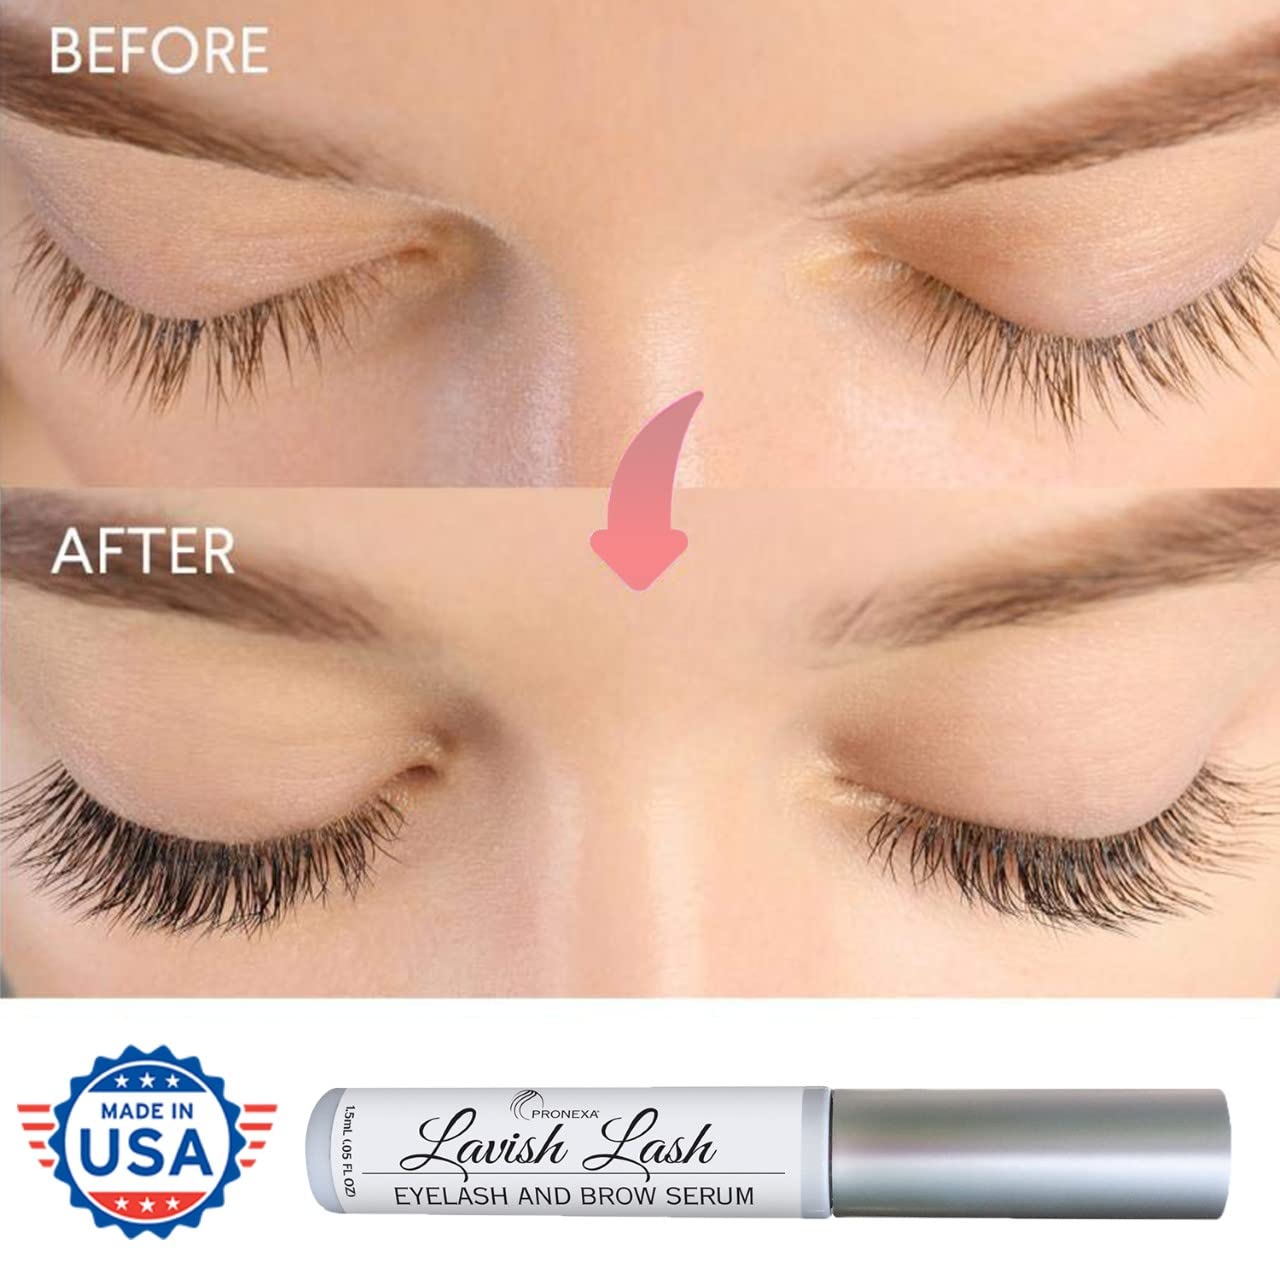 Pronexa Hairgenics Lavish Lash (3ml, 3 Month Supply) – Eyelash Growth Enhancer & Brow Serum with Natural Growth Peptides for Long, Thick Lashes and Eyebrows! Dermatologist Certified & Hypoallergenic.